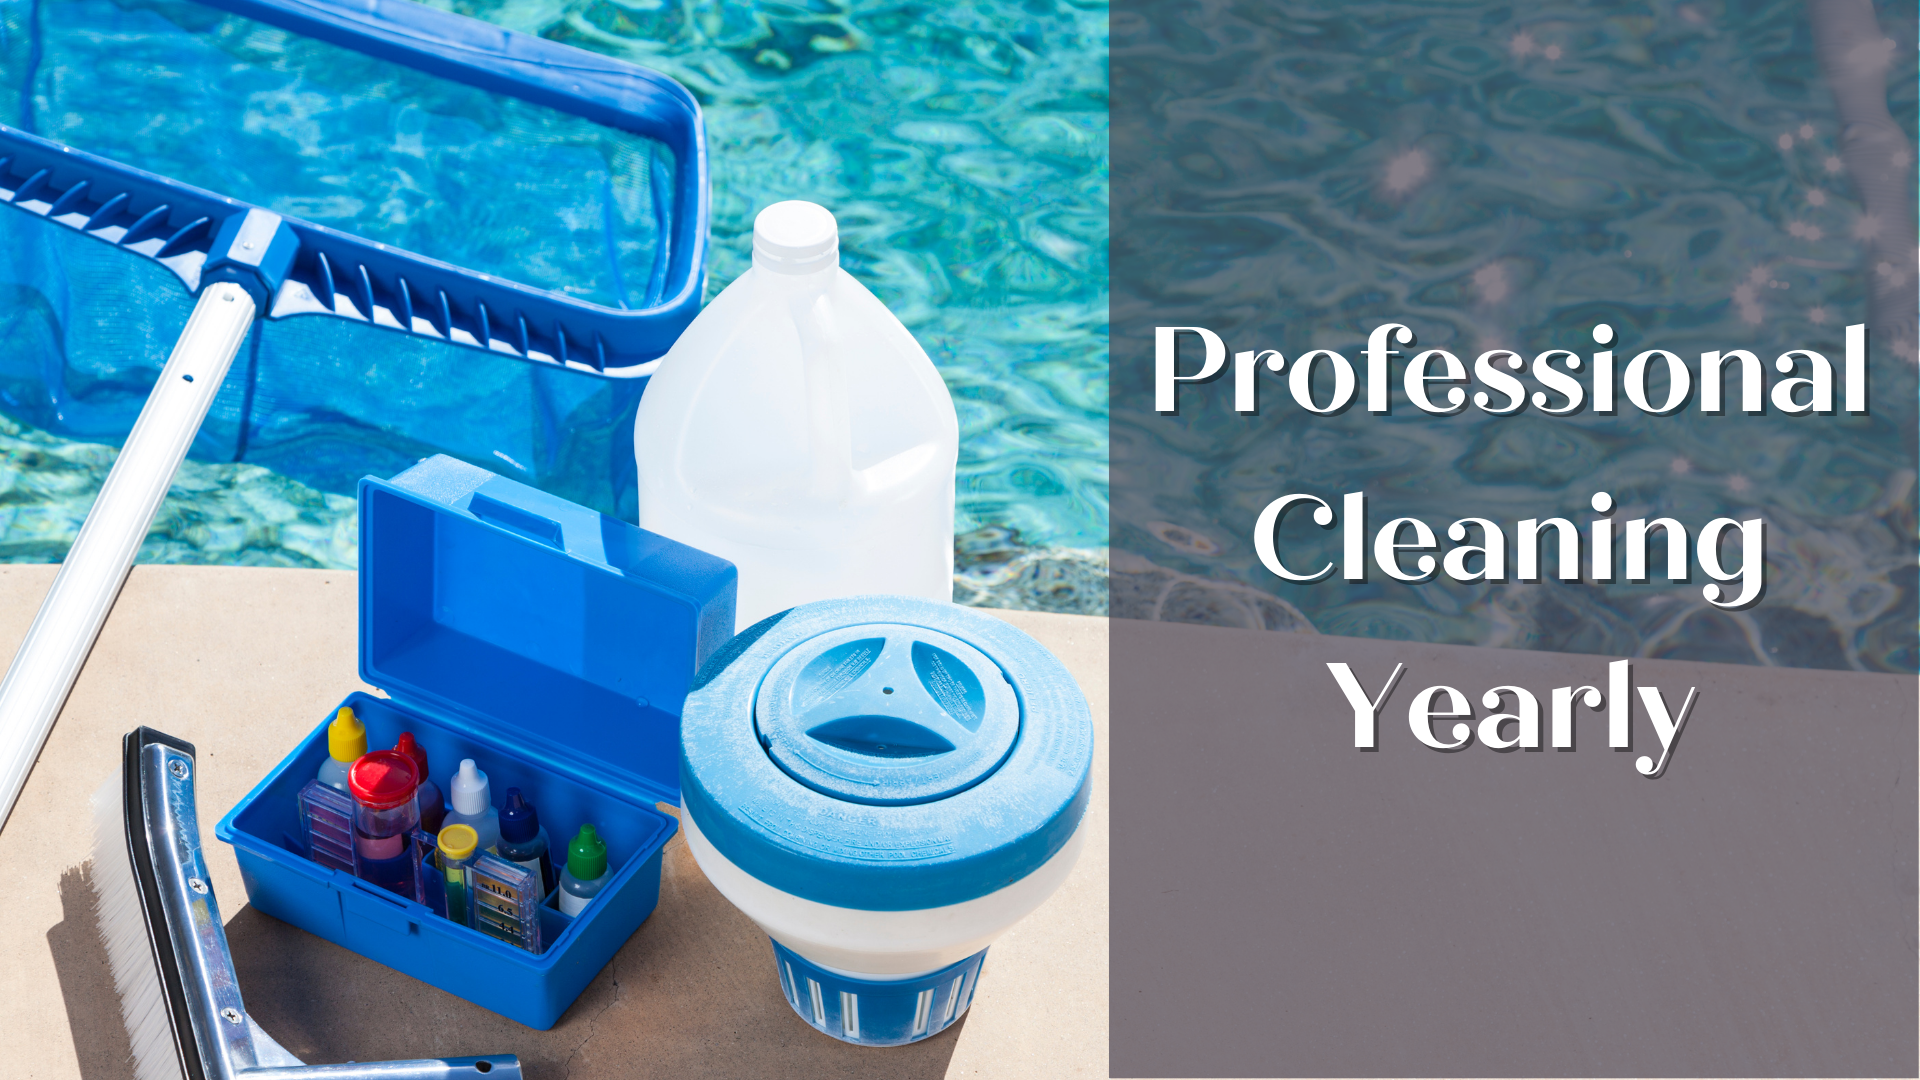 Professional Cleaning Yearly